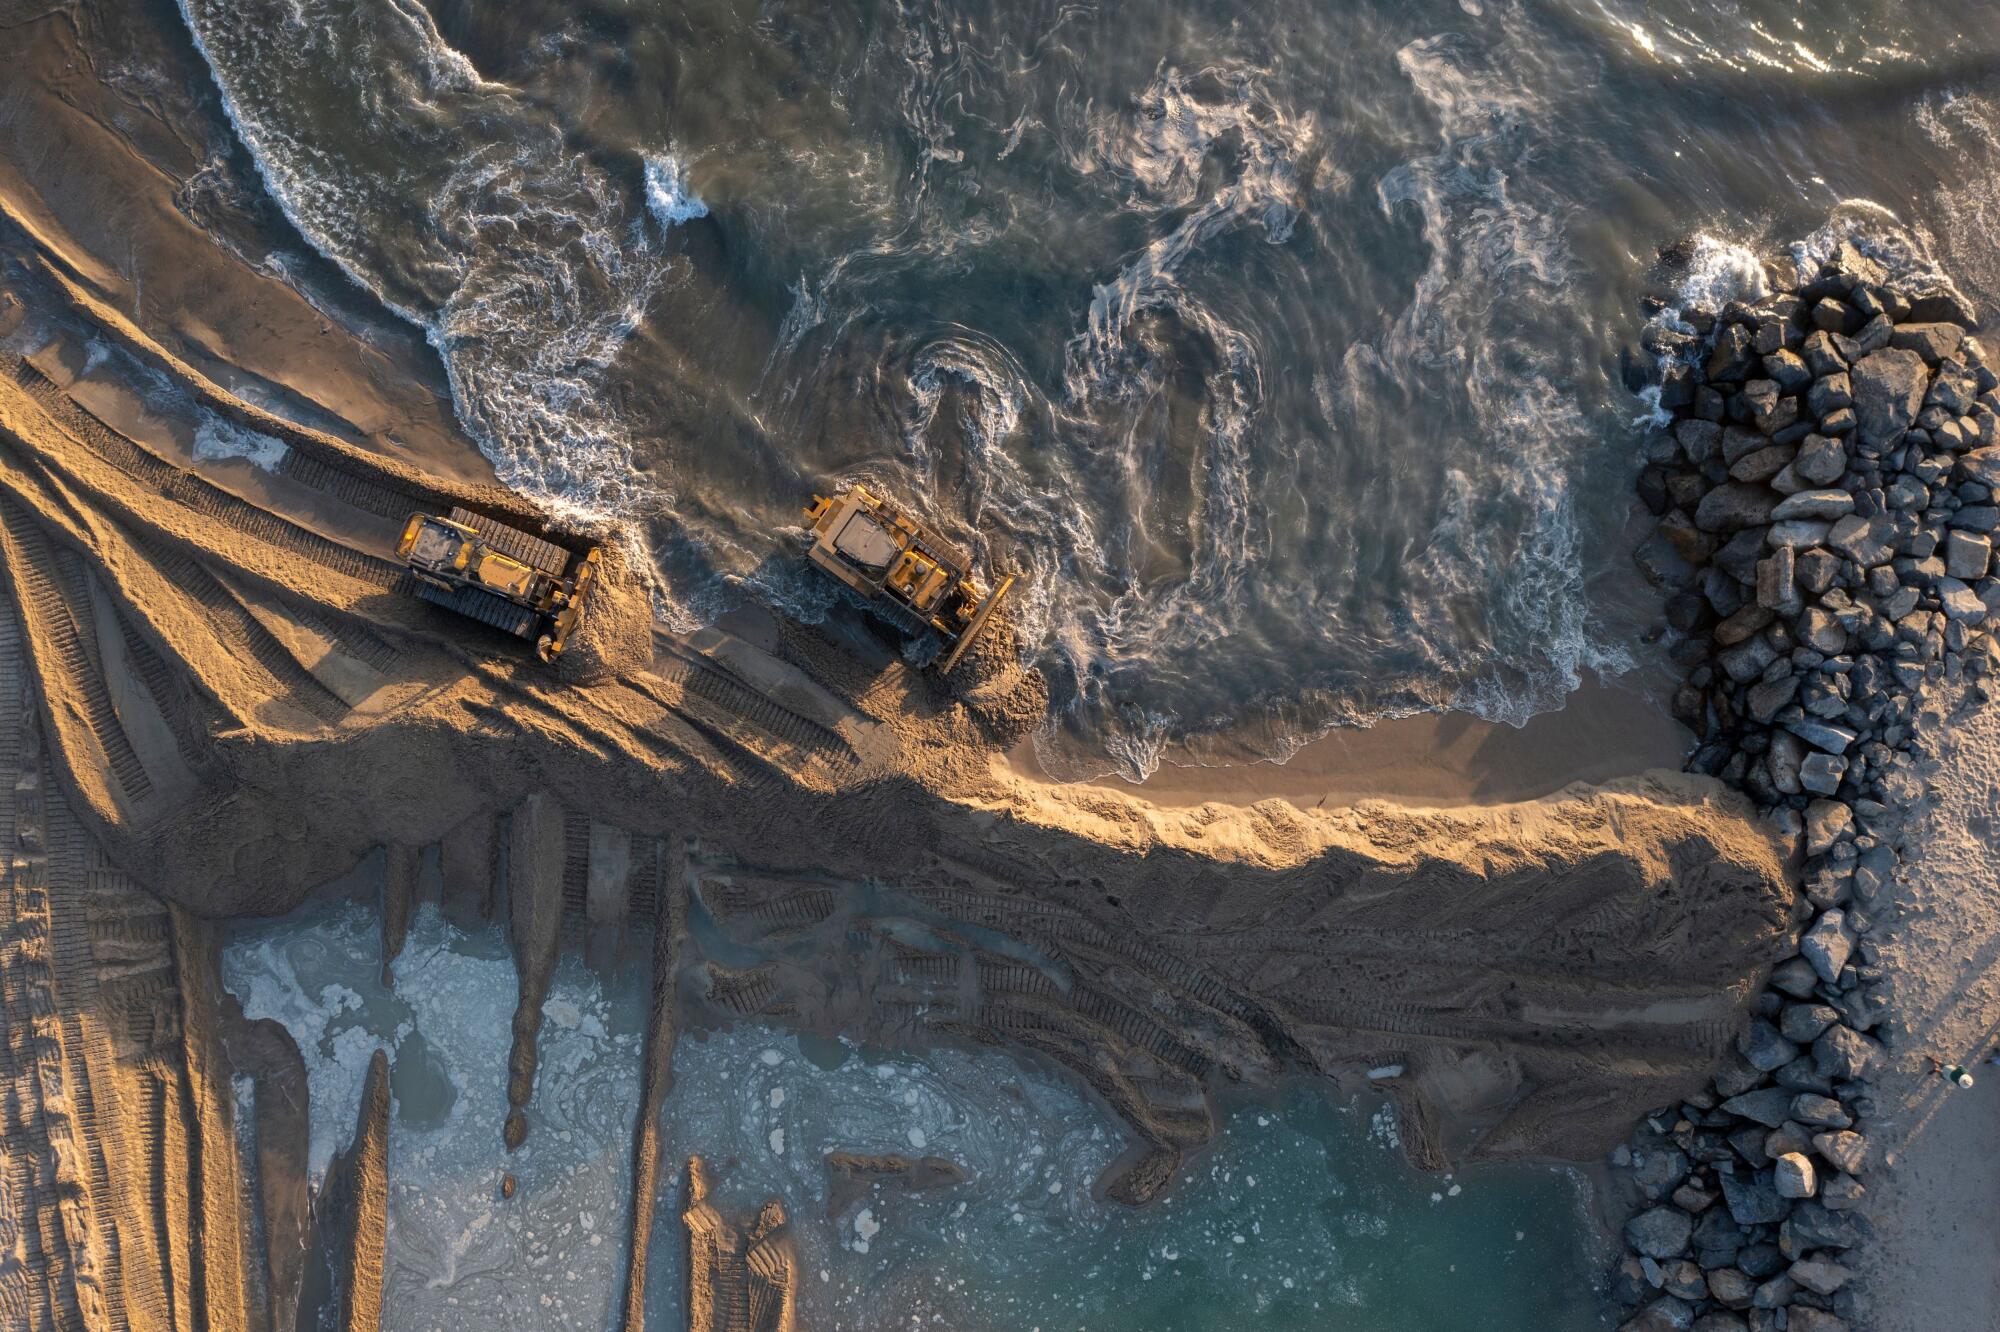 An aerial picture of sand berms and heavy equipment near swirling waves and a rocky barrier